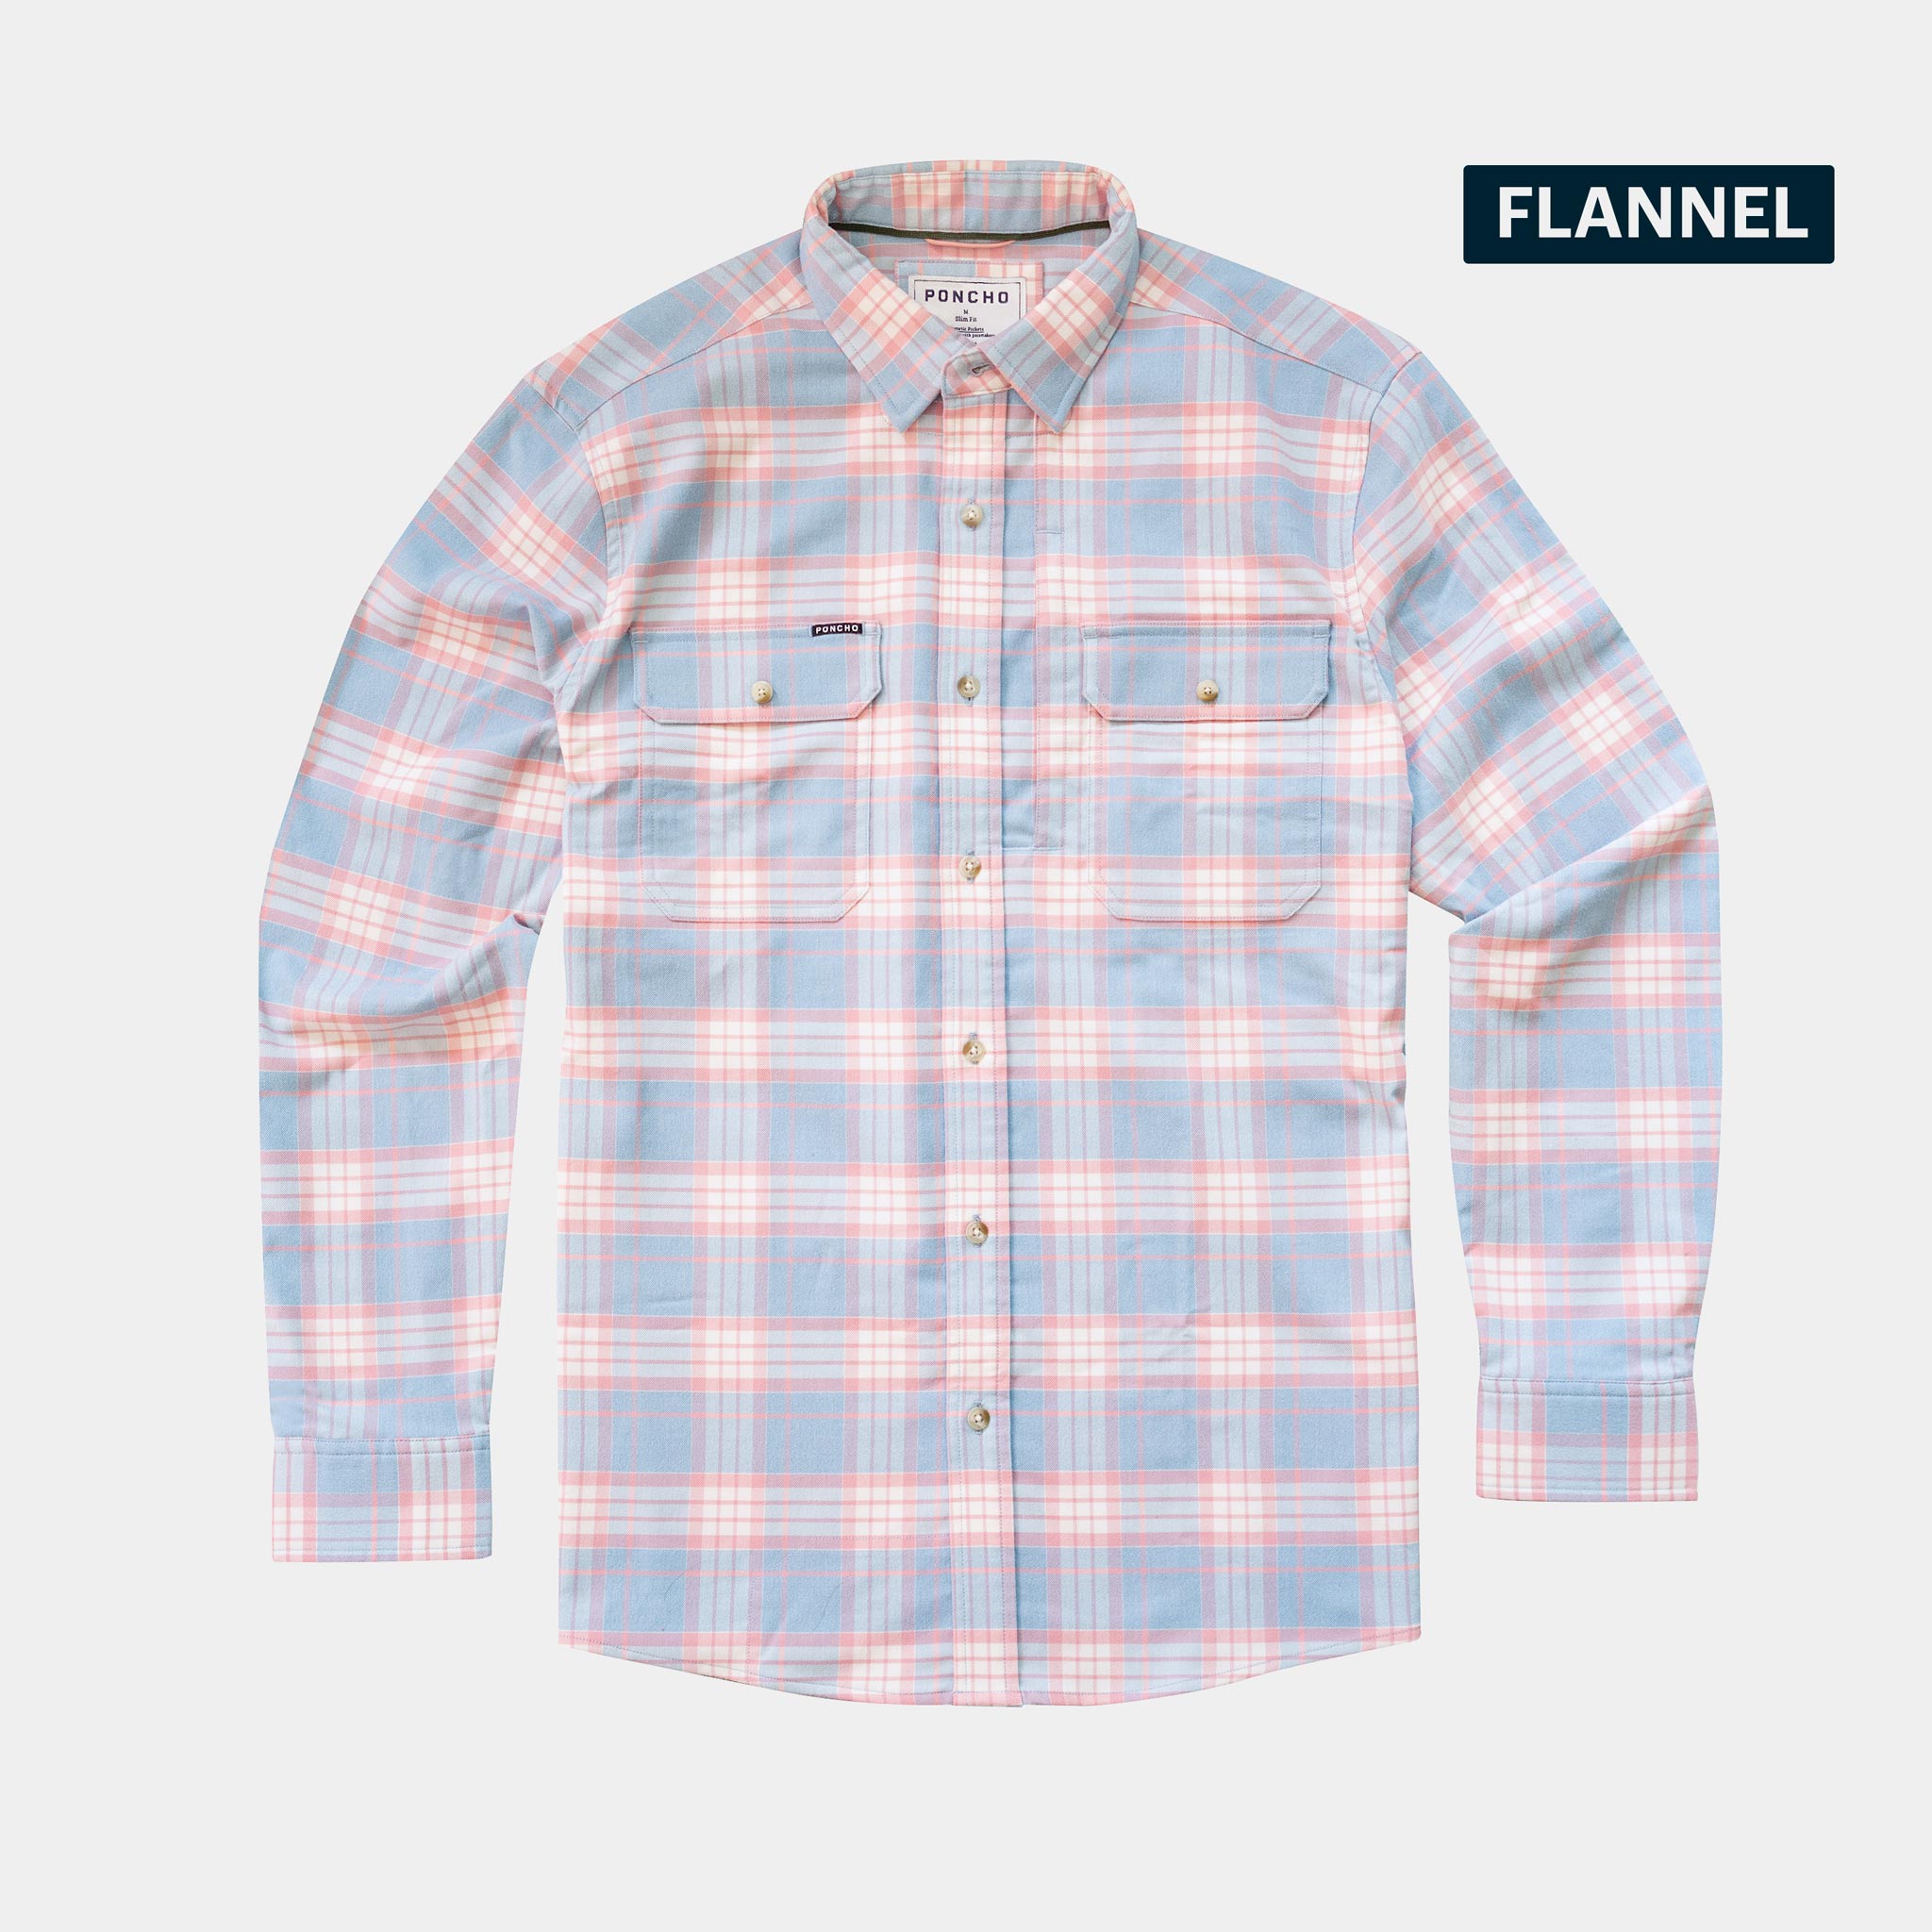 product pic of pink and blue flannel